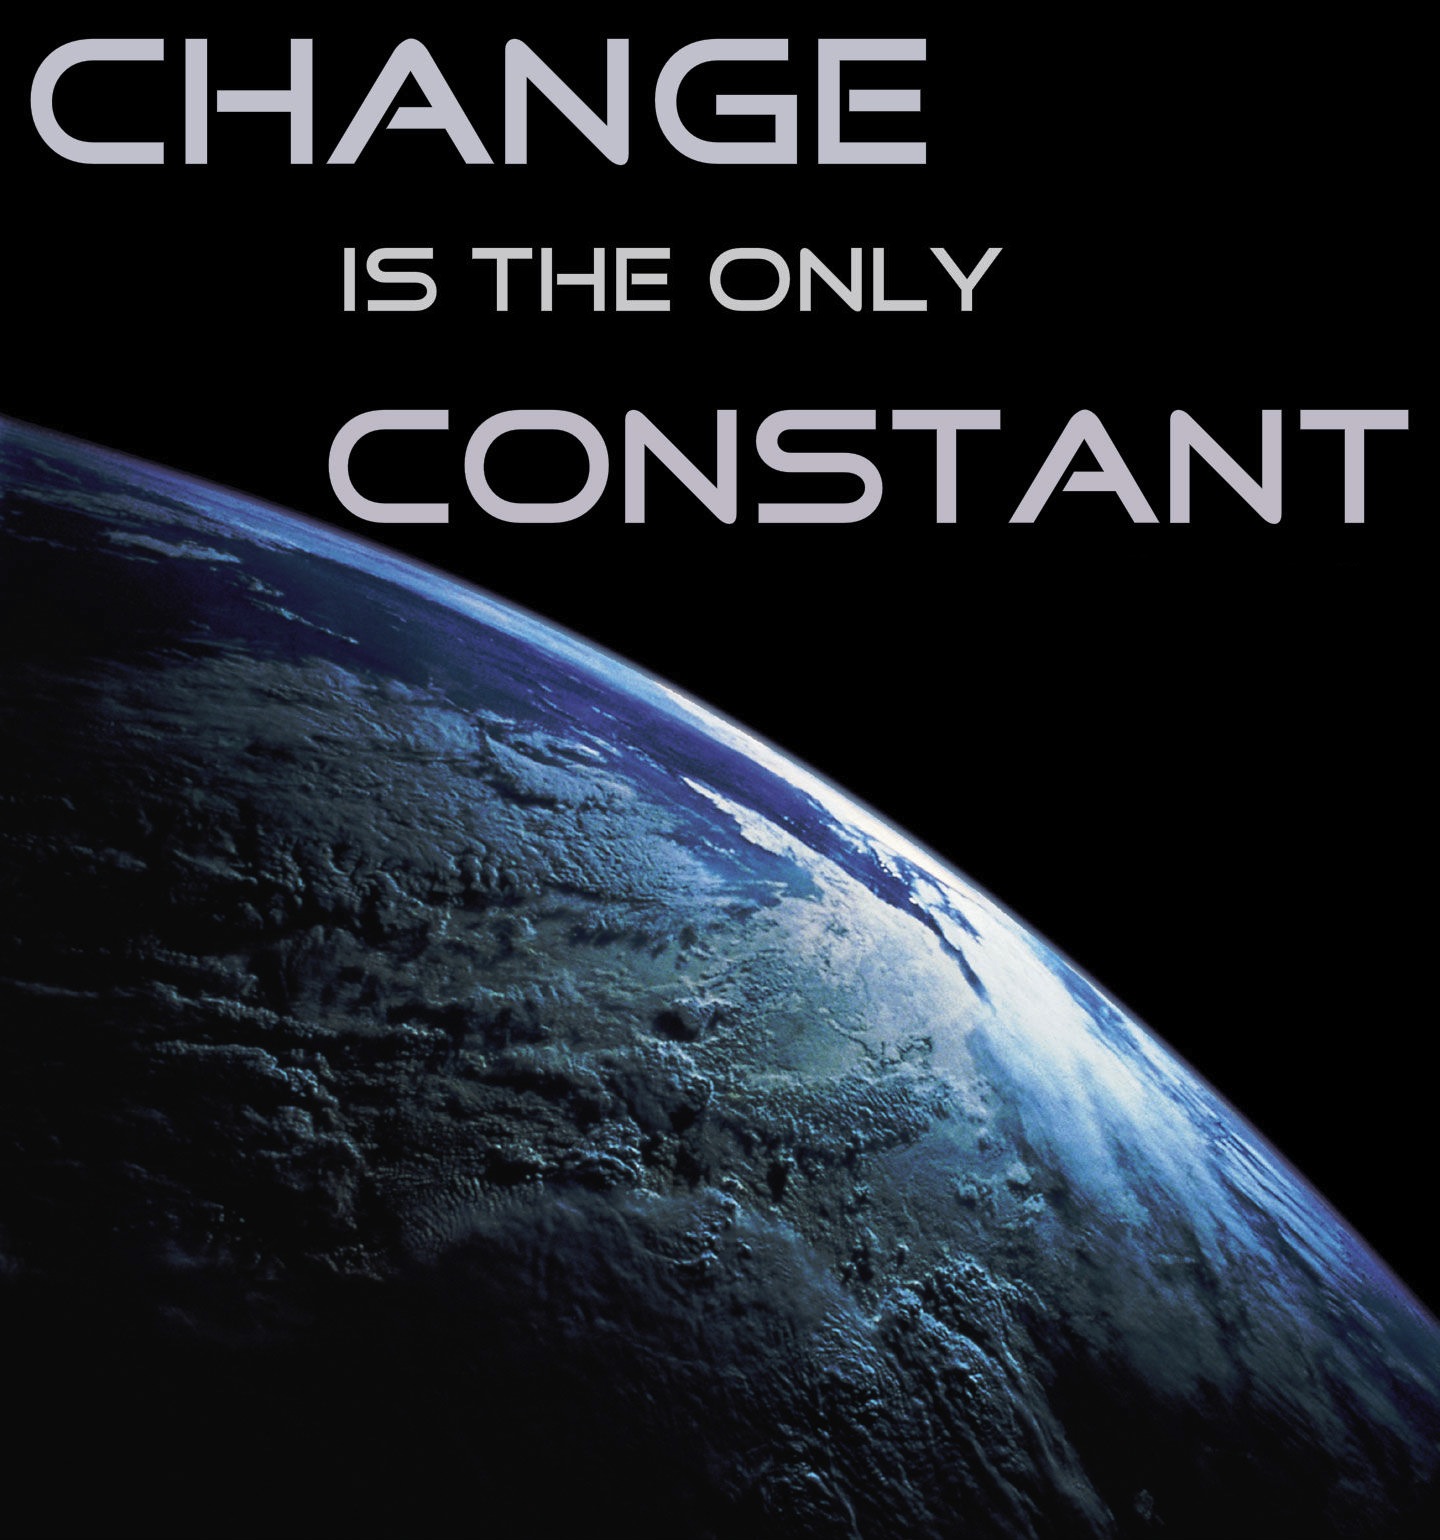 Change is the Only Constant